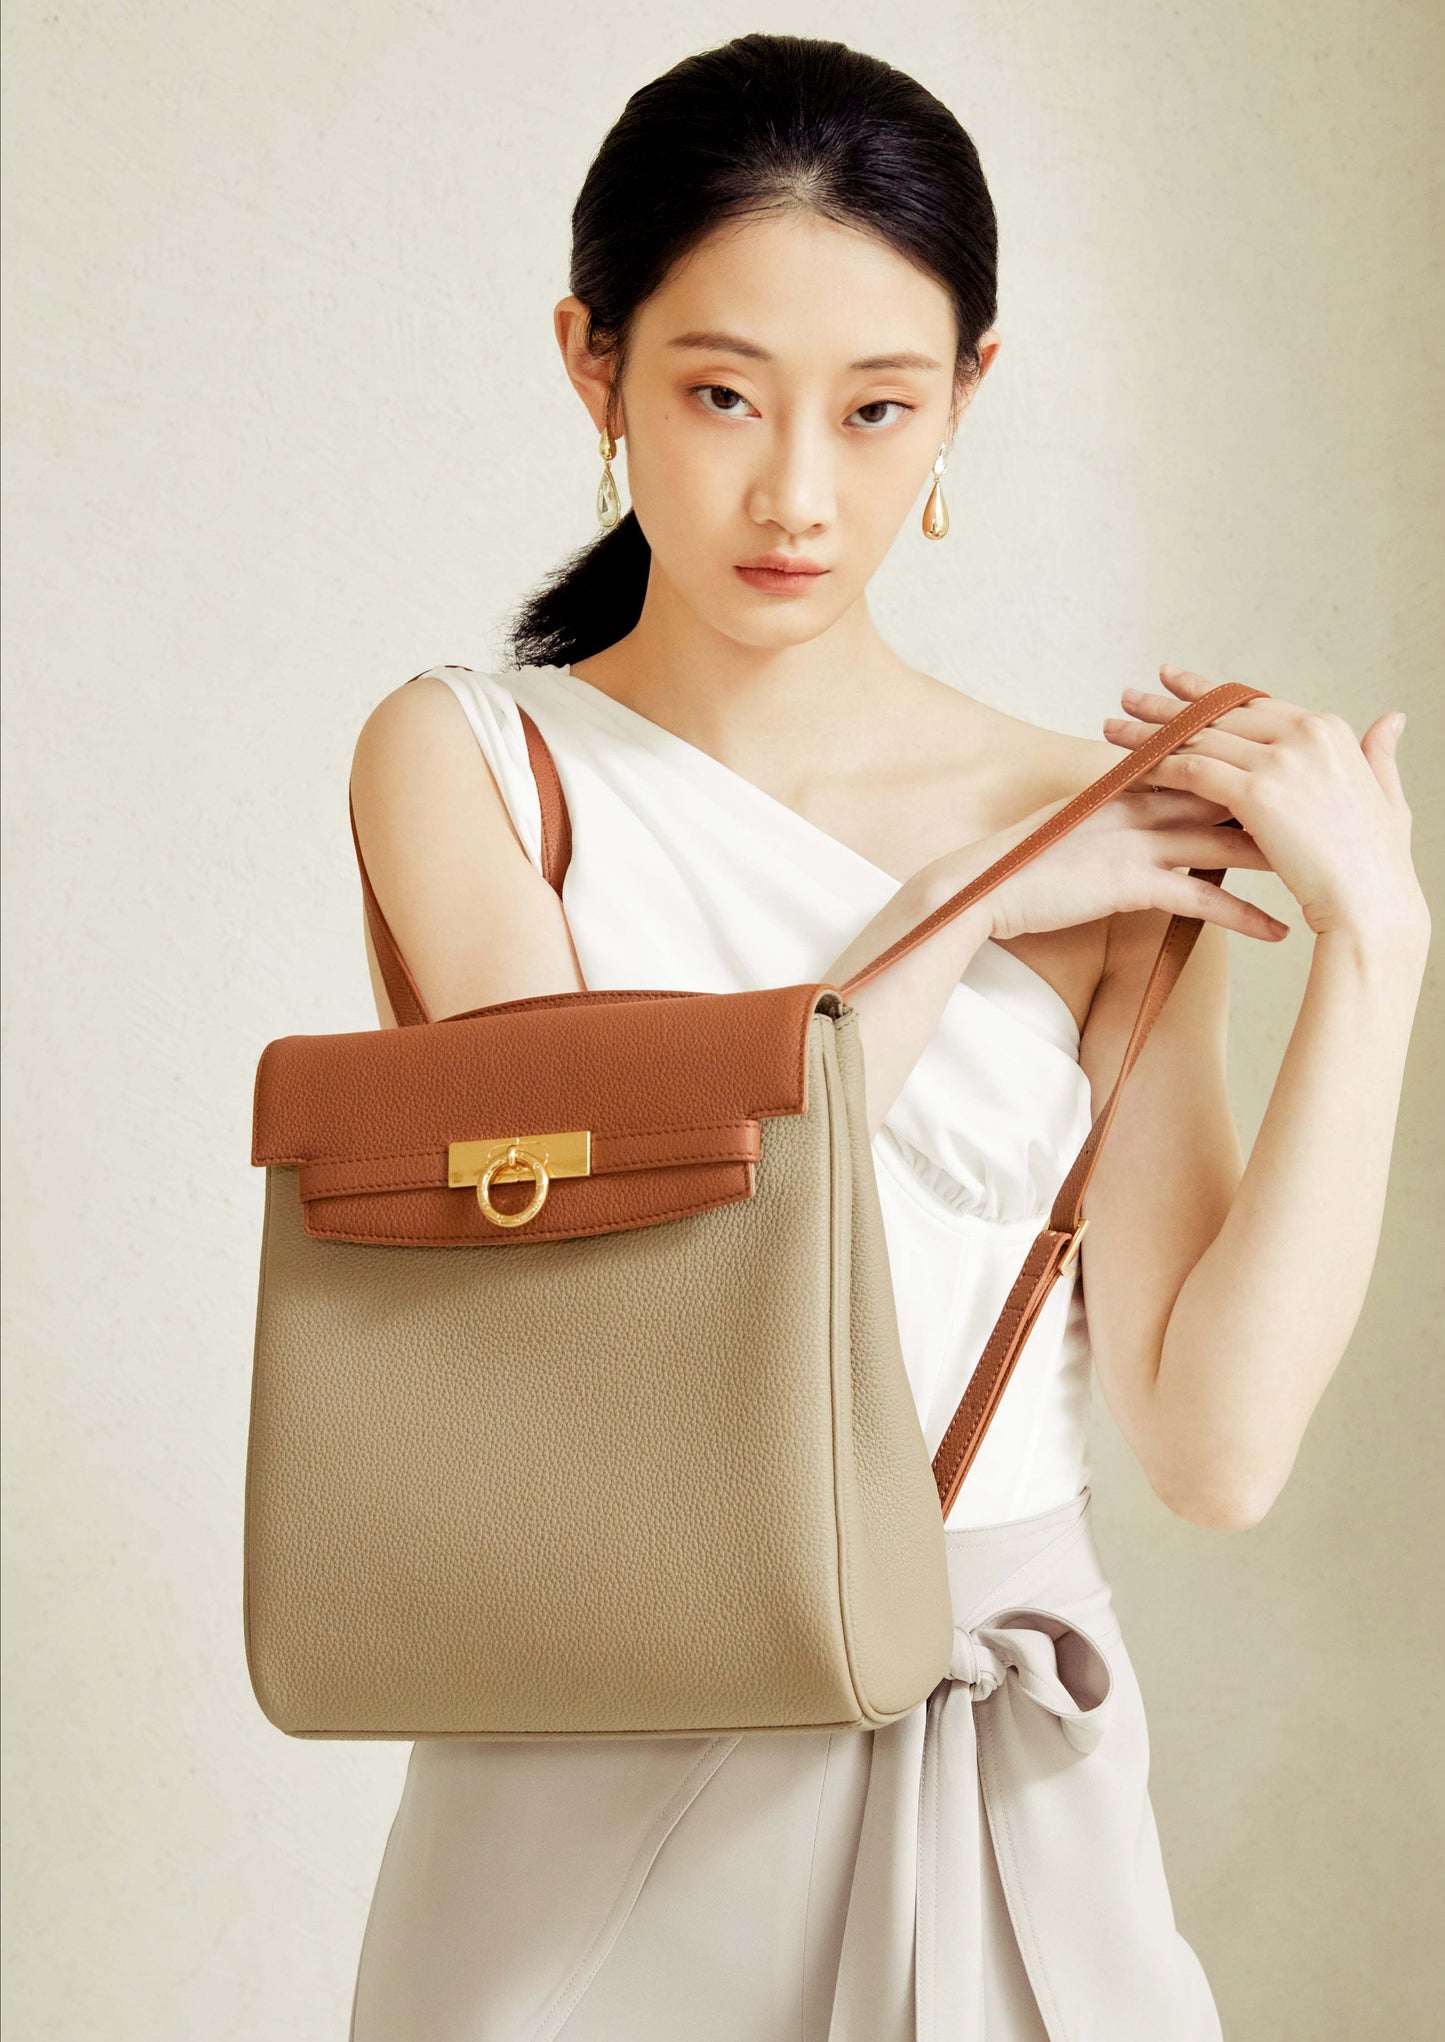 Unlocked Backpack in Taupe Brown | Parisa Wang | Featured